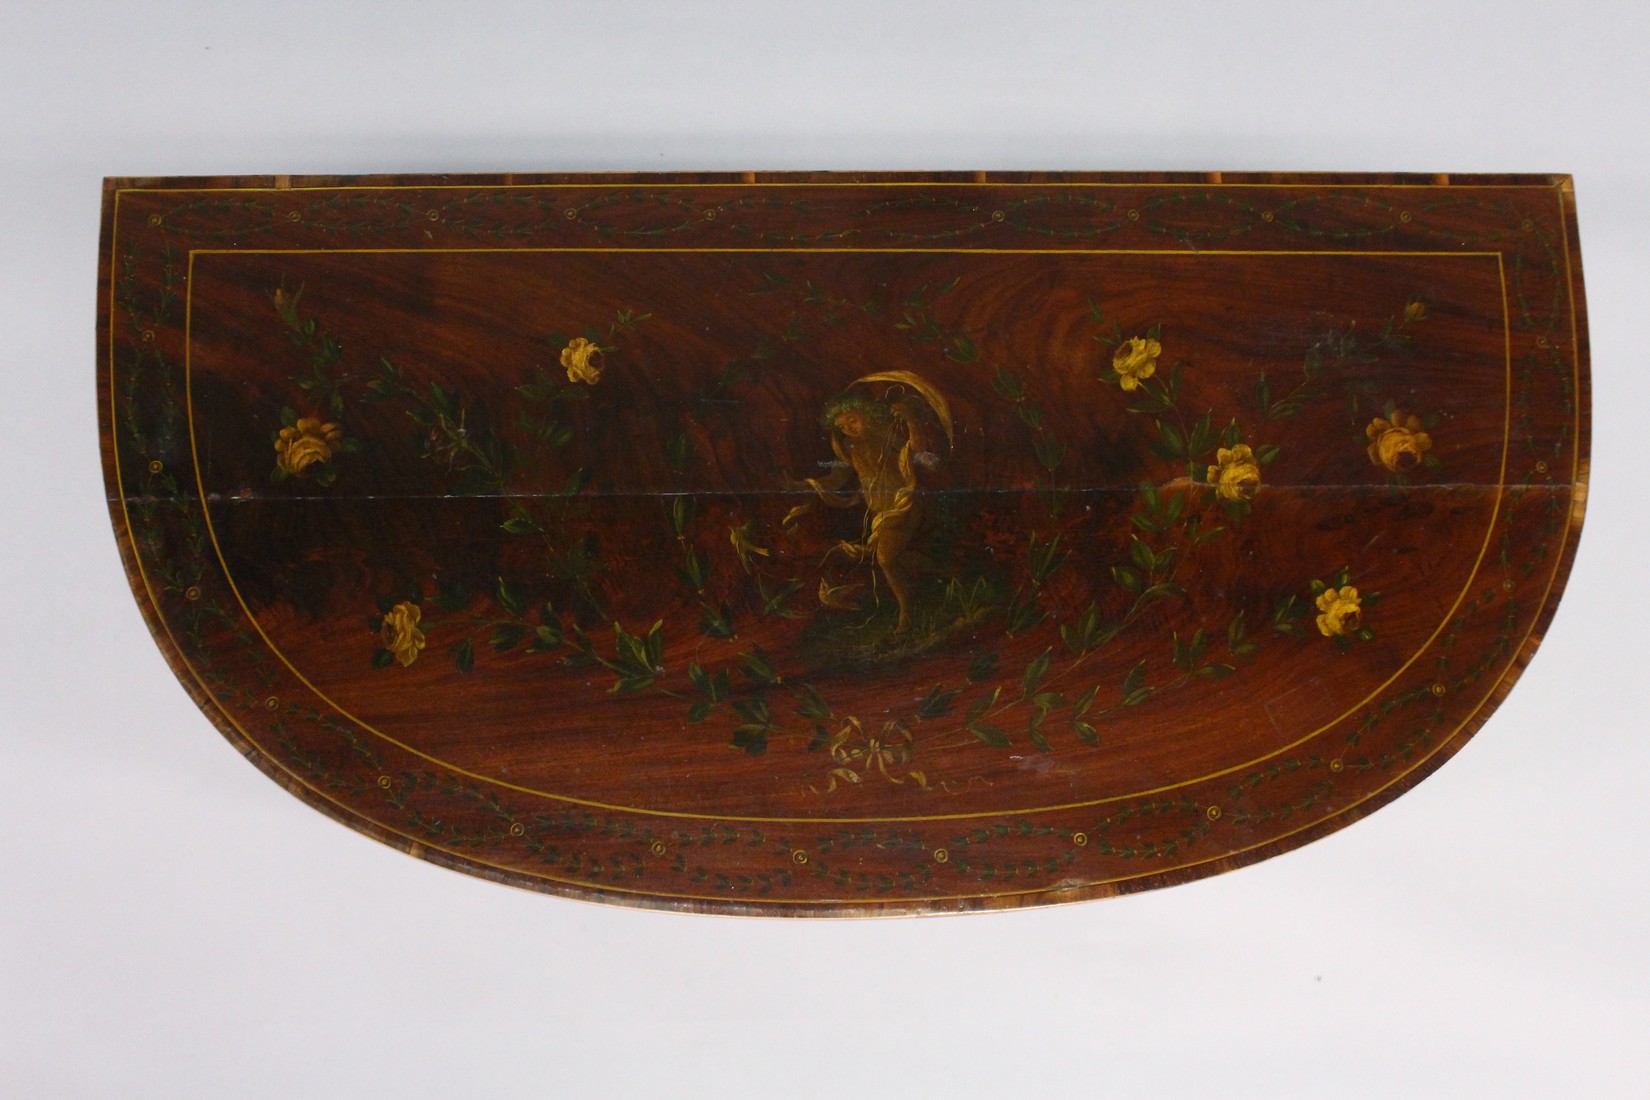 A GEORGIAN SHERATON REVIVAL MAHOGANY CARD TABLE painted with garlands and flowers with banded top - Image 5 of 8